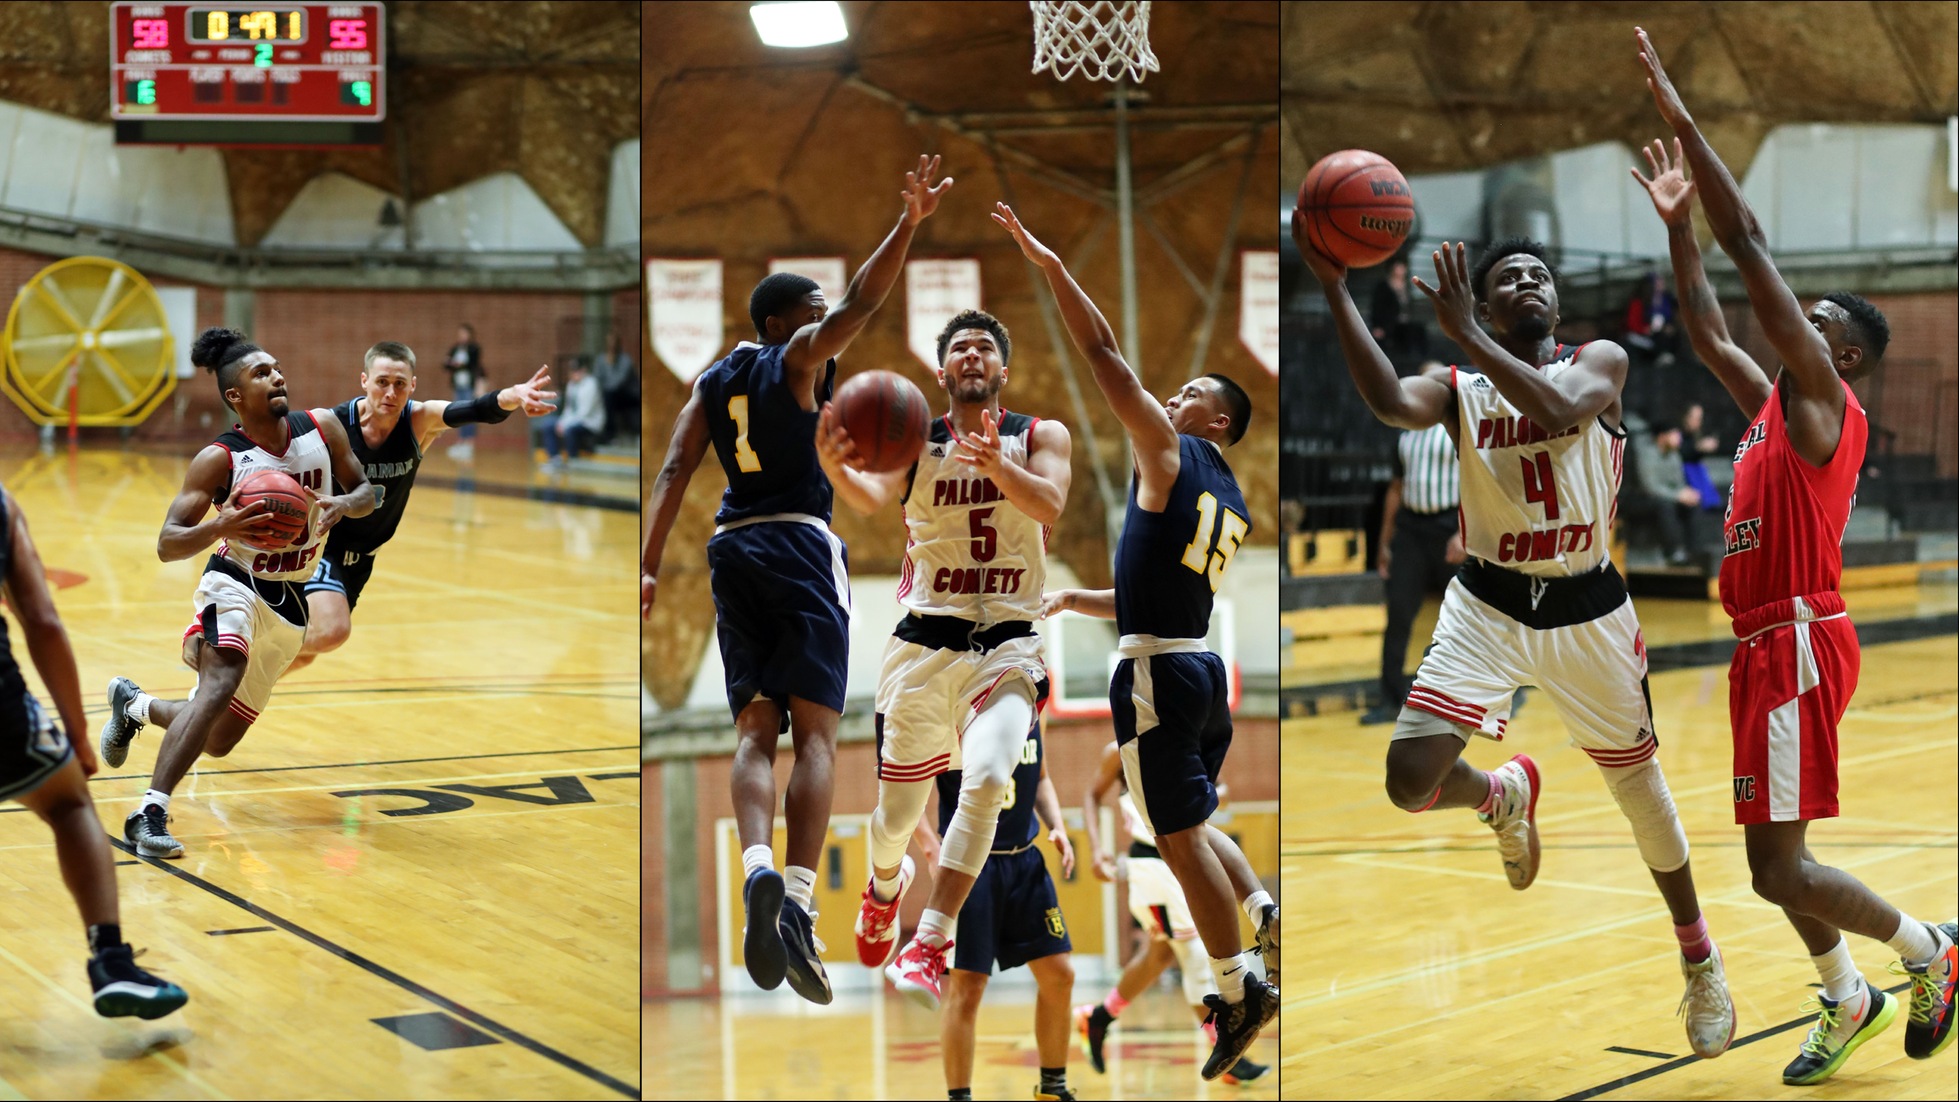 From left: Zadok Wilson (1st Team), Michael Brandon (2nd Team) and Anthony Brewer (2nd Team) all receive All-PCAC honors. Photos by Hugh Cox.